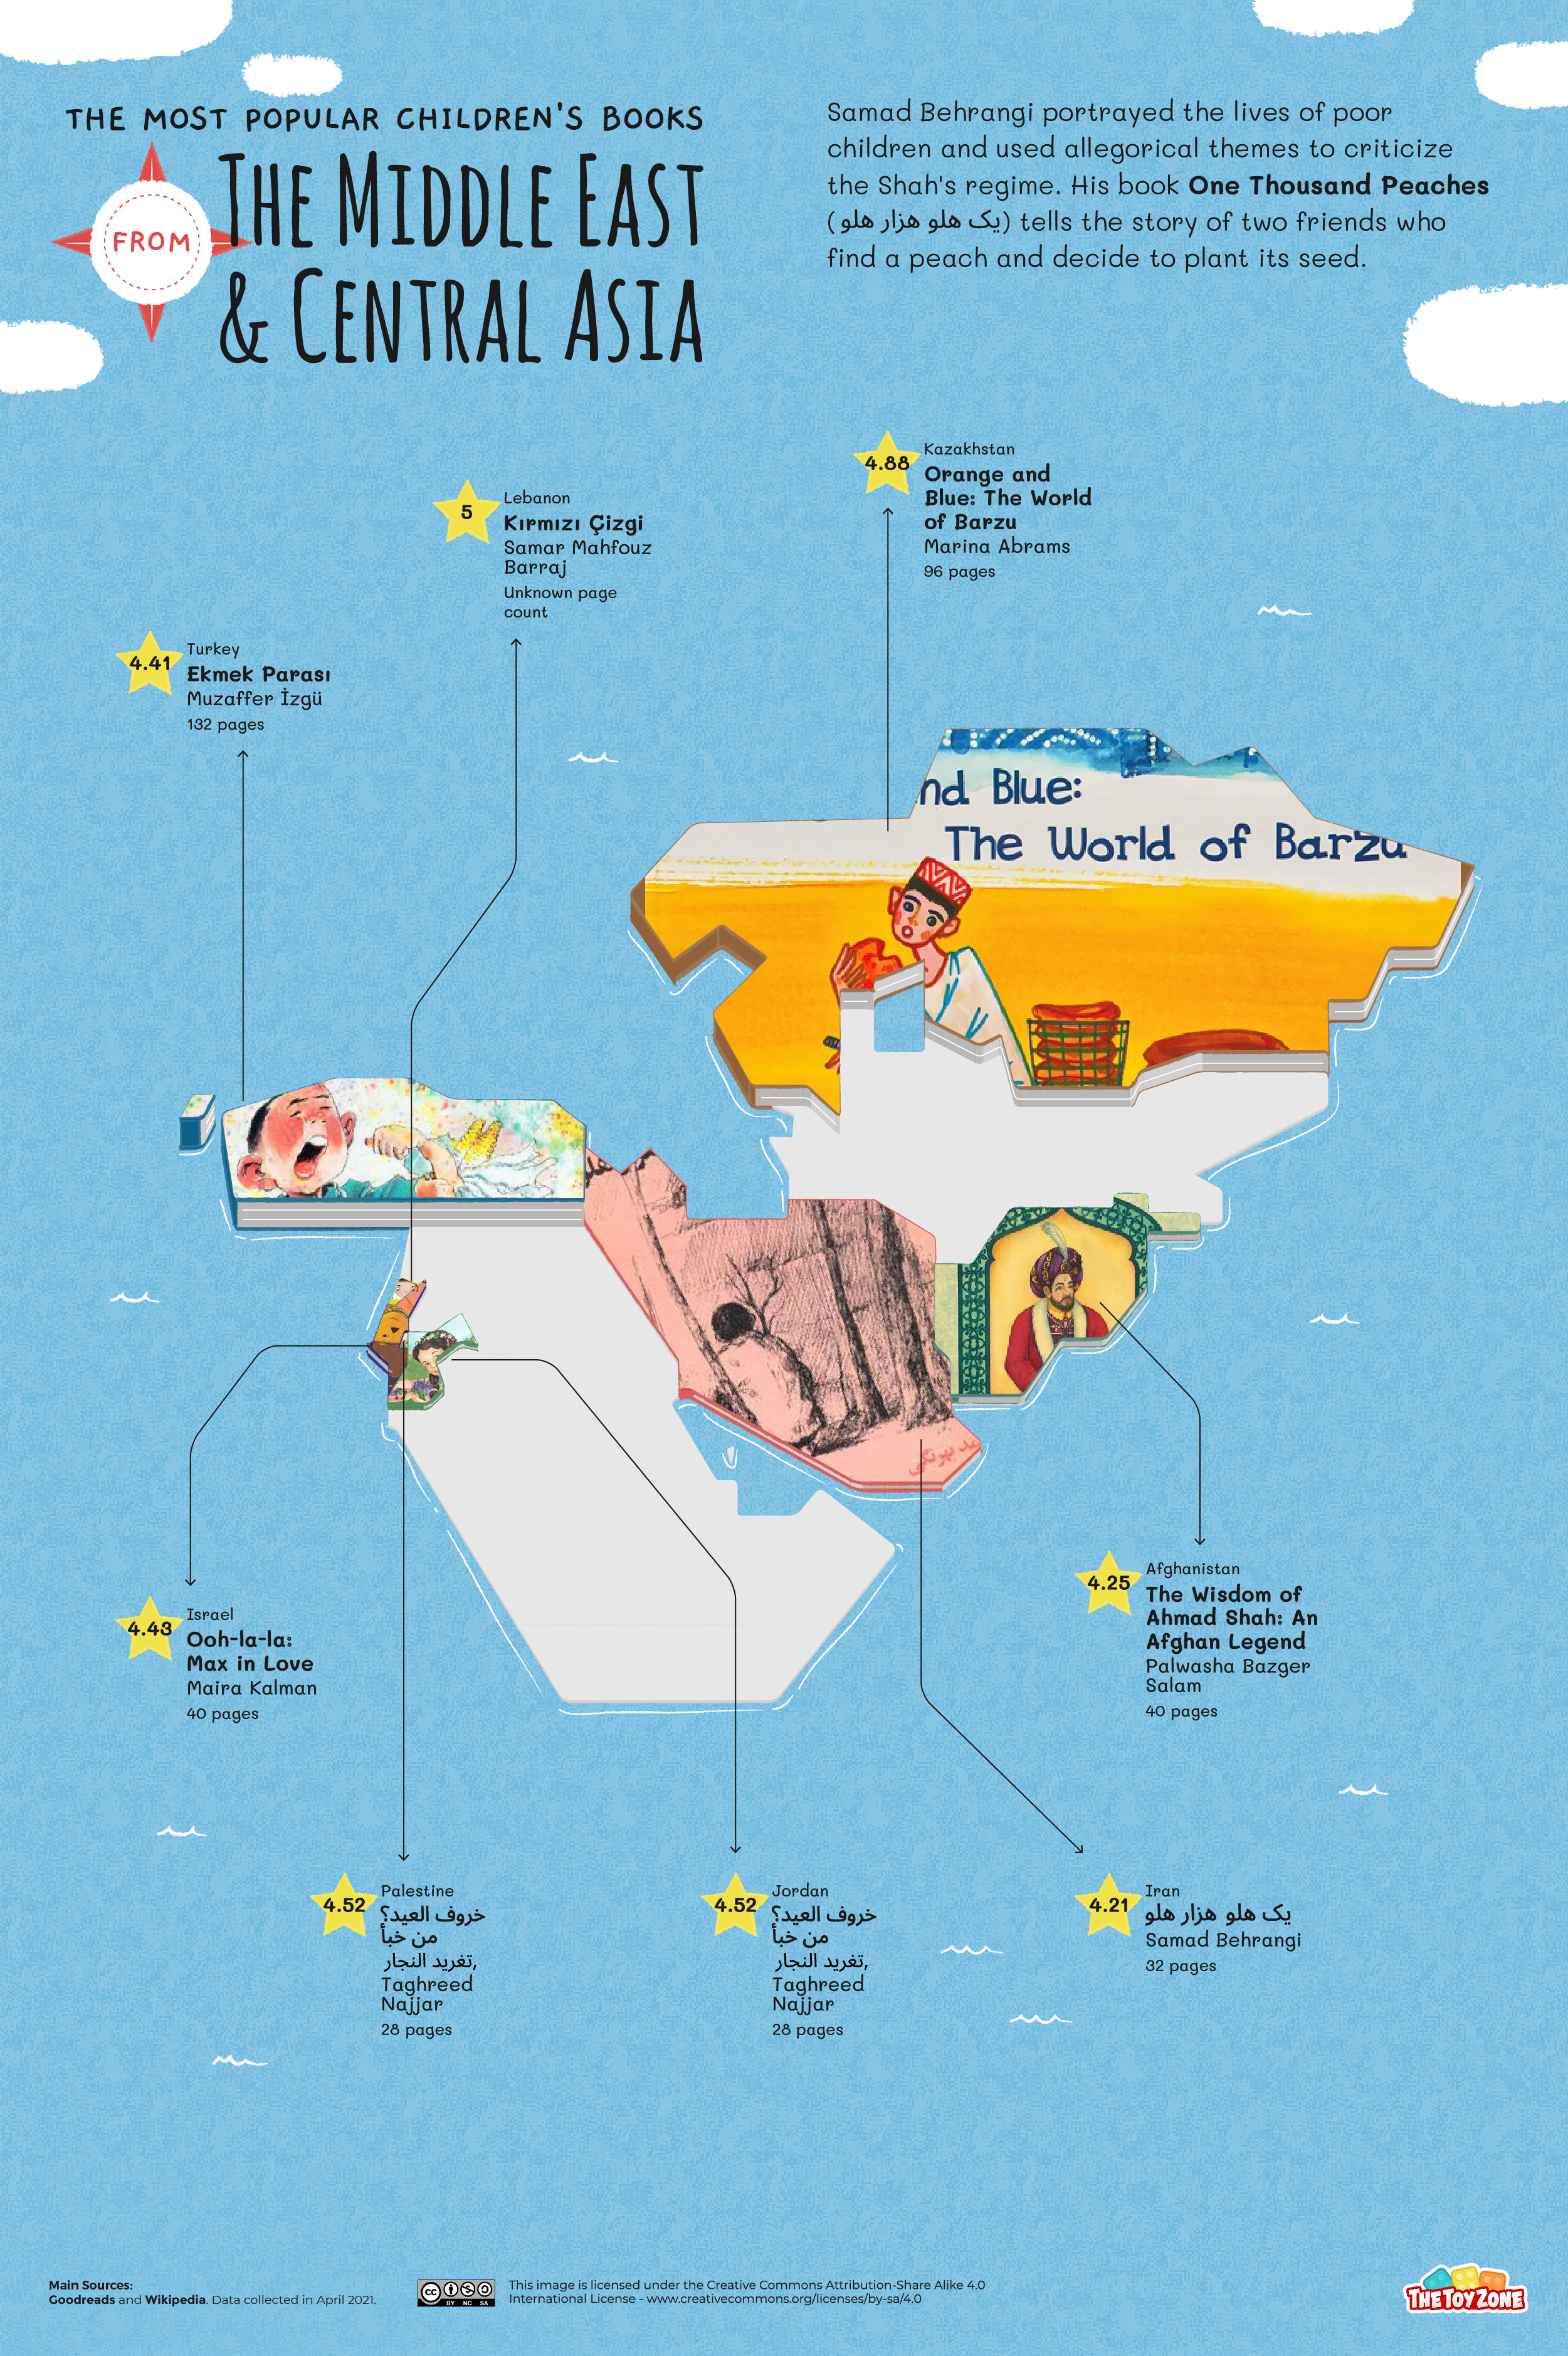 Most popular children's books in Middle East and Central Asia map